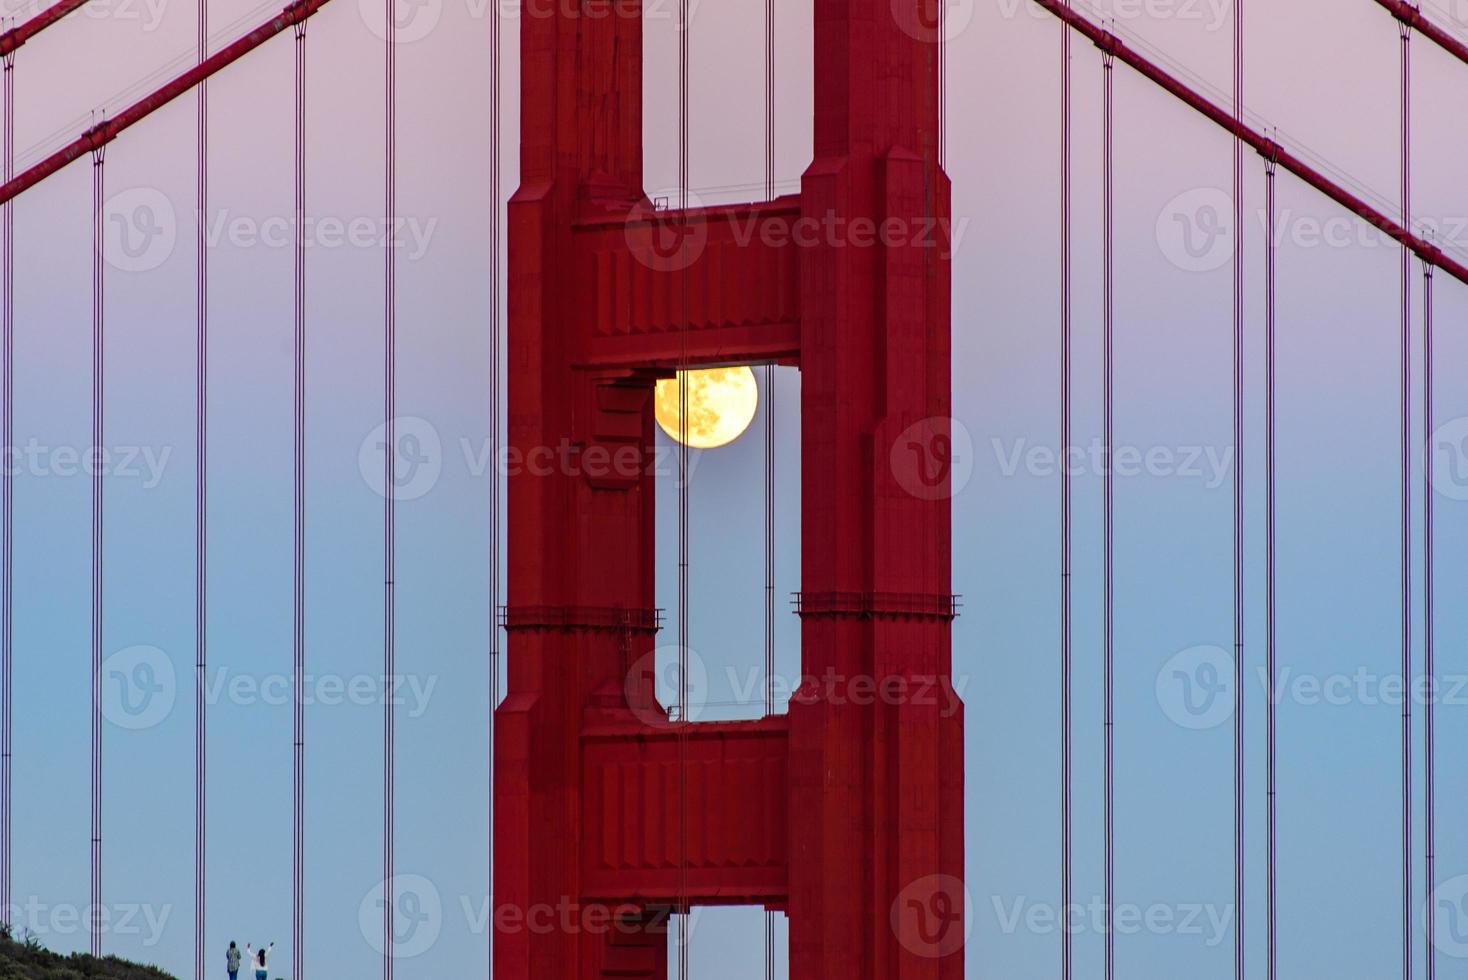 Majestic San Francisco Golden Gate Bridge with June 2022 full moon rising and the north tower as seen from Marin Headlands in California photo